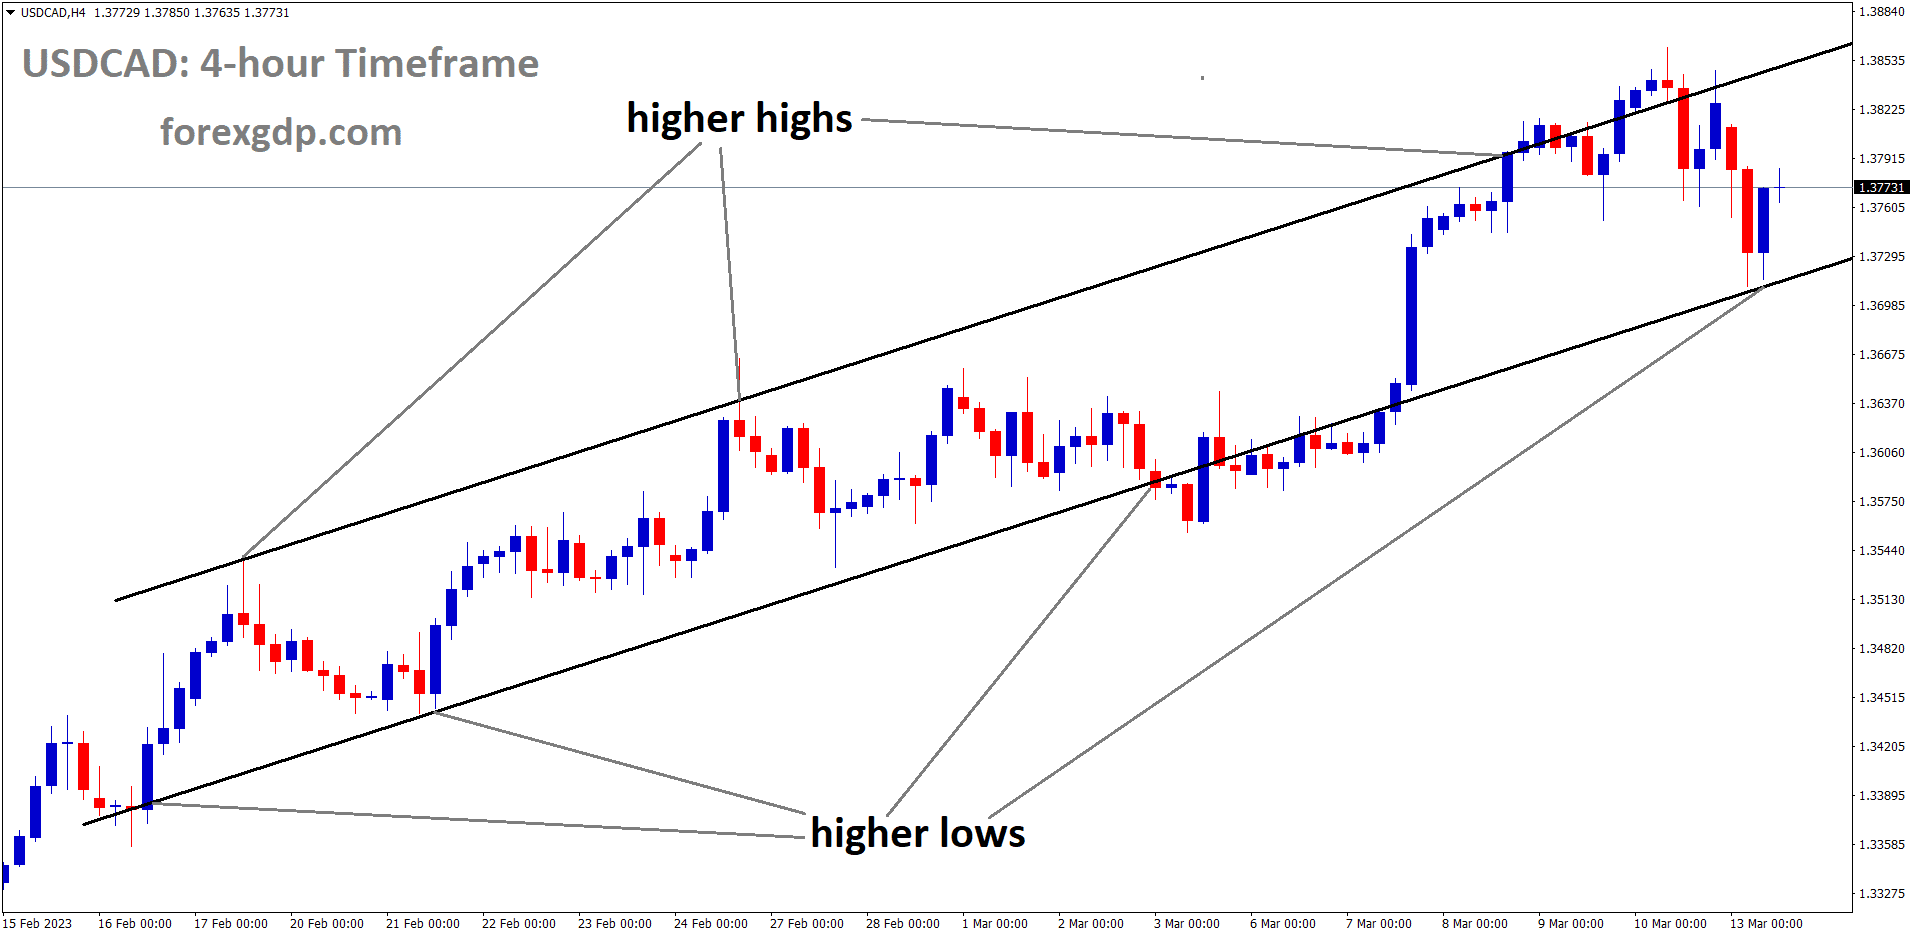 USDCAD is moving an Ascending channel and the market has rebounded from the higher low area of the channel.